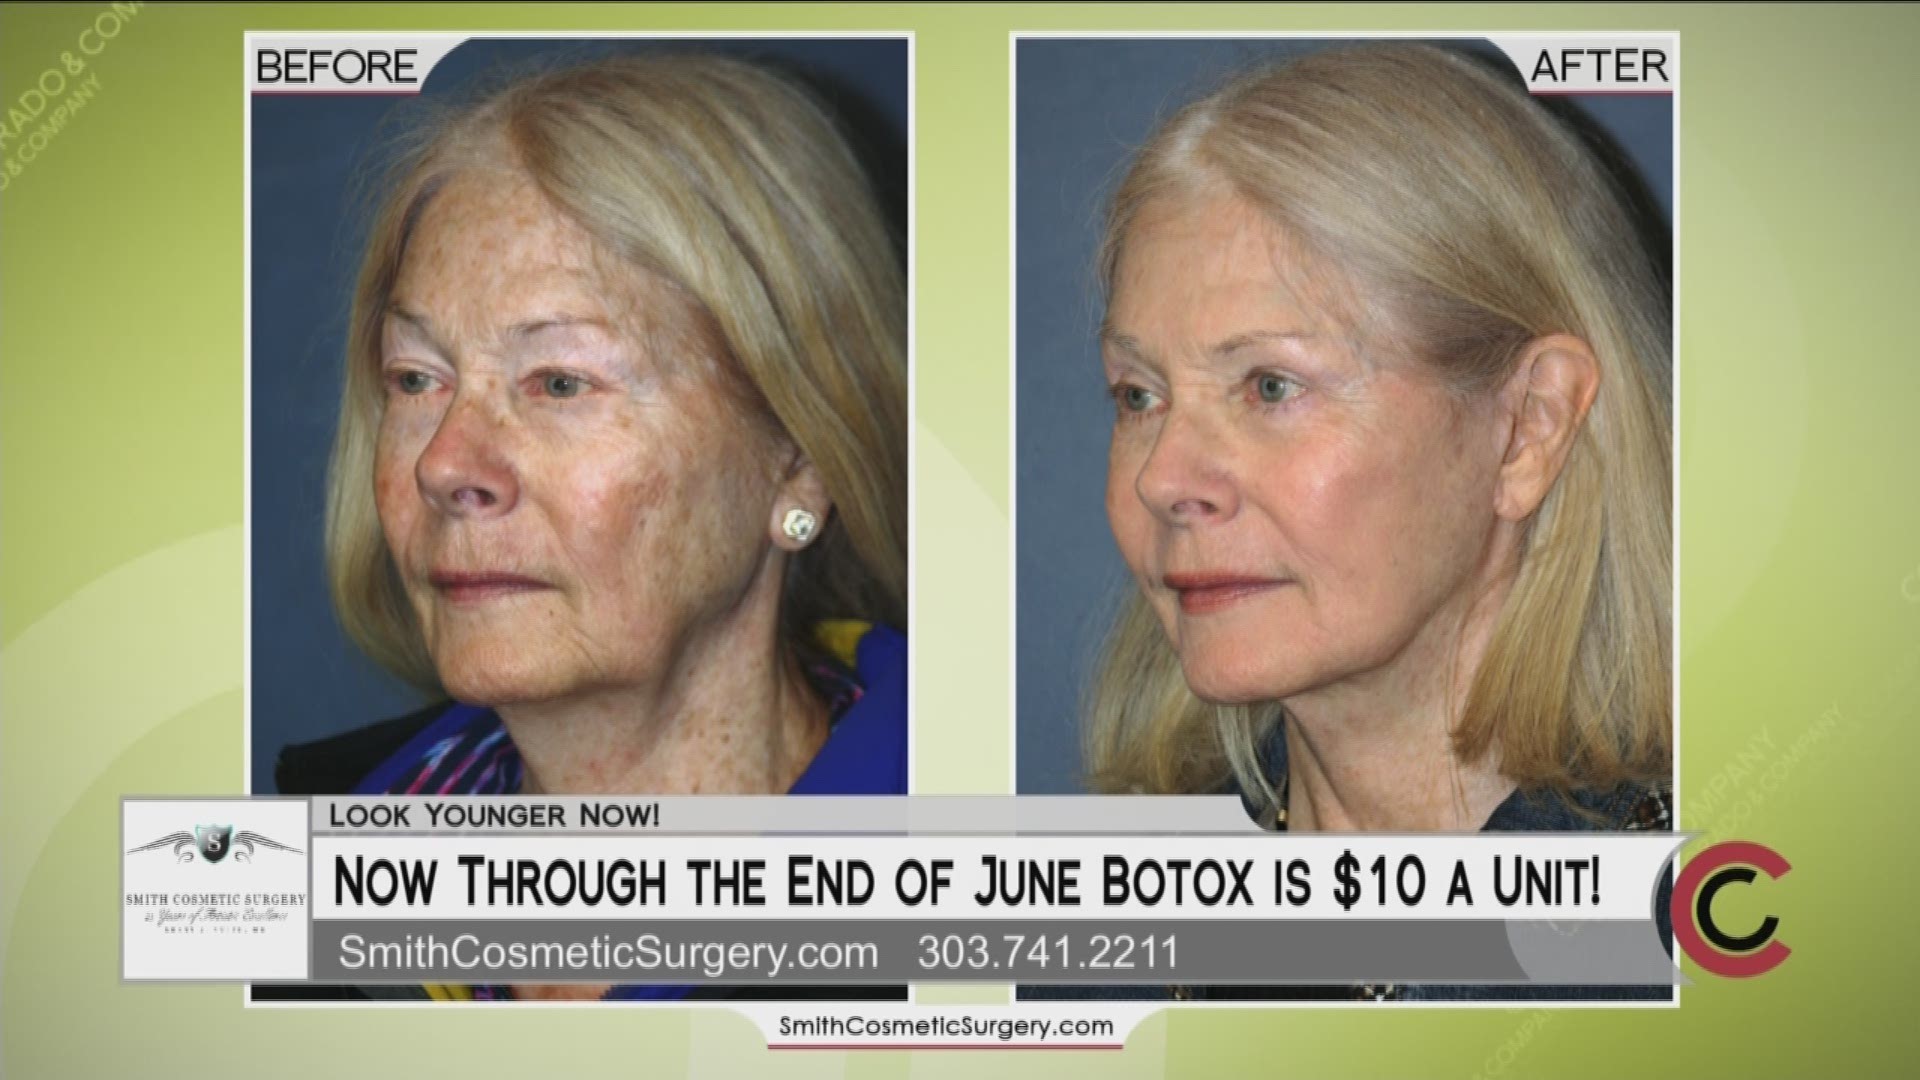 Make an informed choice for your facial cosmetic procedure. Dr. Brent Smith will develop the right plan for you and your budget. Initial consultations are free, as well as complimentary computer imaging to preview your potential results. $10 Botox treatments are going on through the end of June. Give them a call at 303.741.2211 or go online to www.SmithCosmeticSurgery.com. 
THIS INTERVIEW HAS COMMERCIAL CONTENT. PRODUCTS AND SERVICES FEATURED APPEAR AS PAID ADVERTISING.